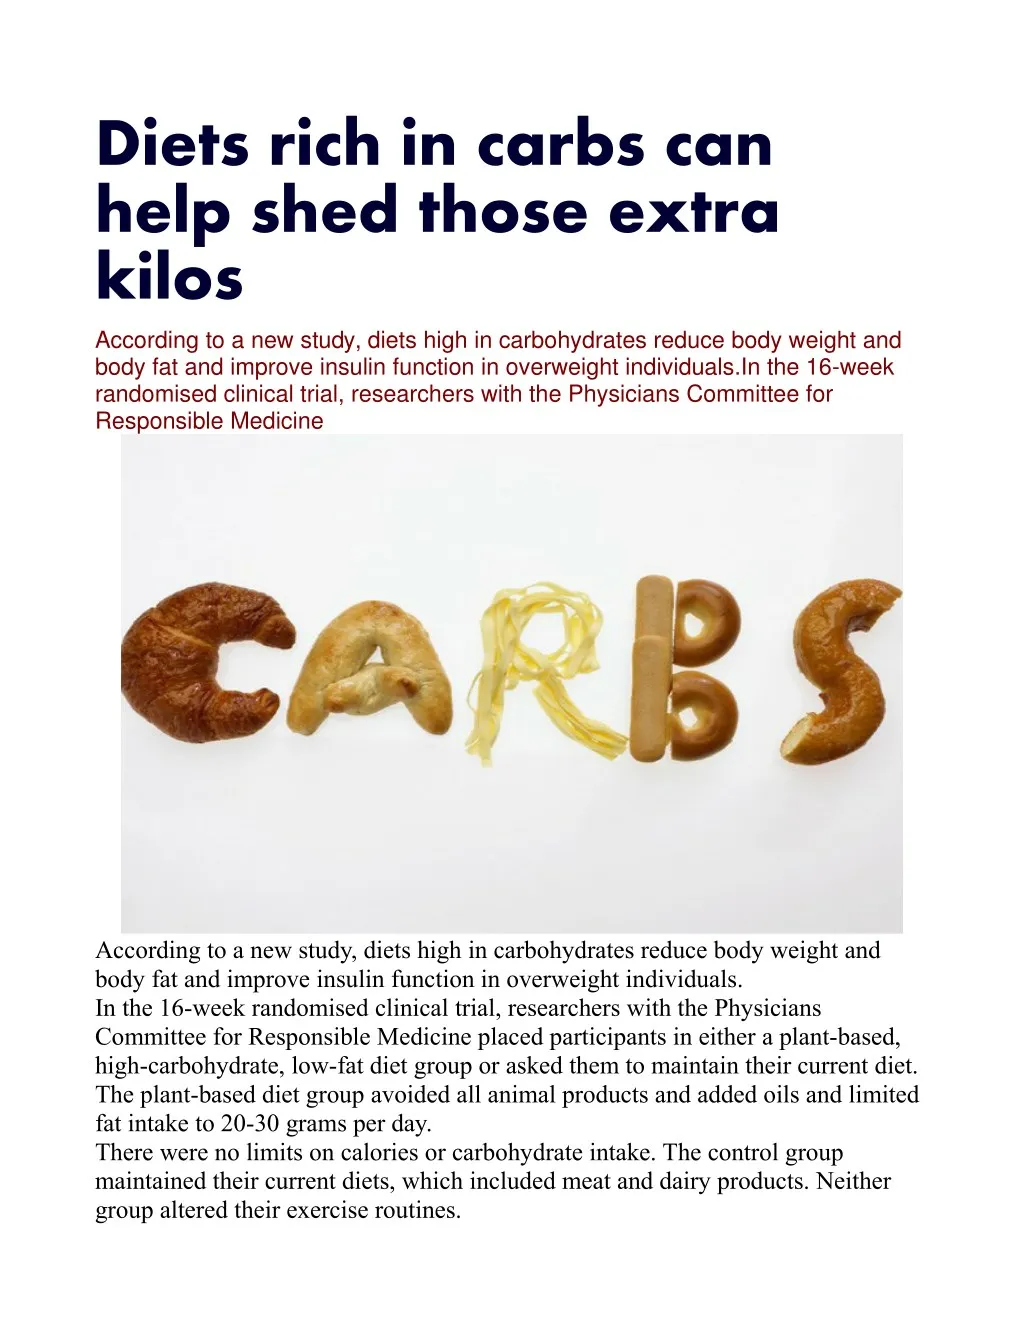 diets rich in carbs can help shed those extra